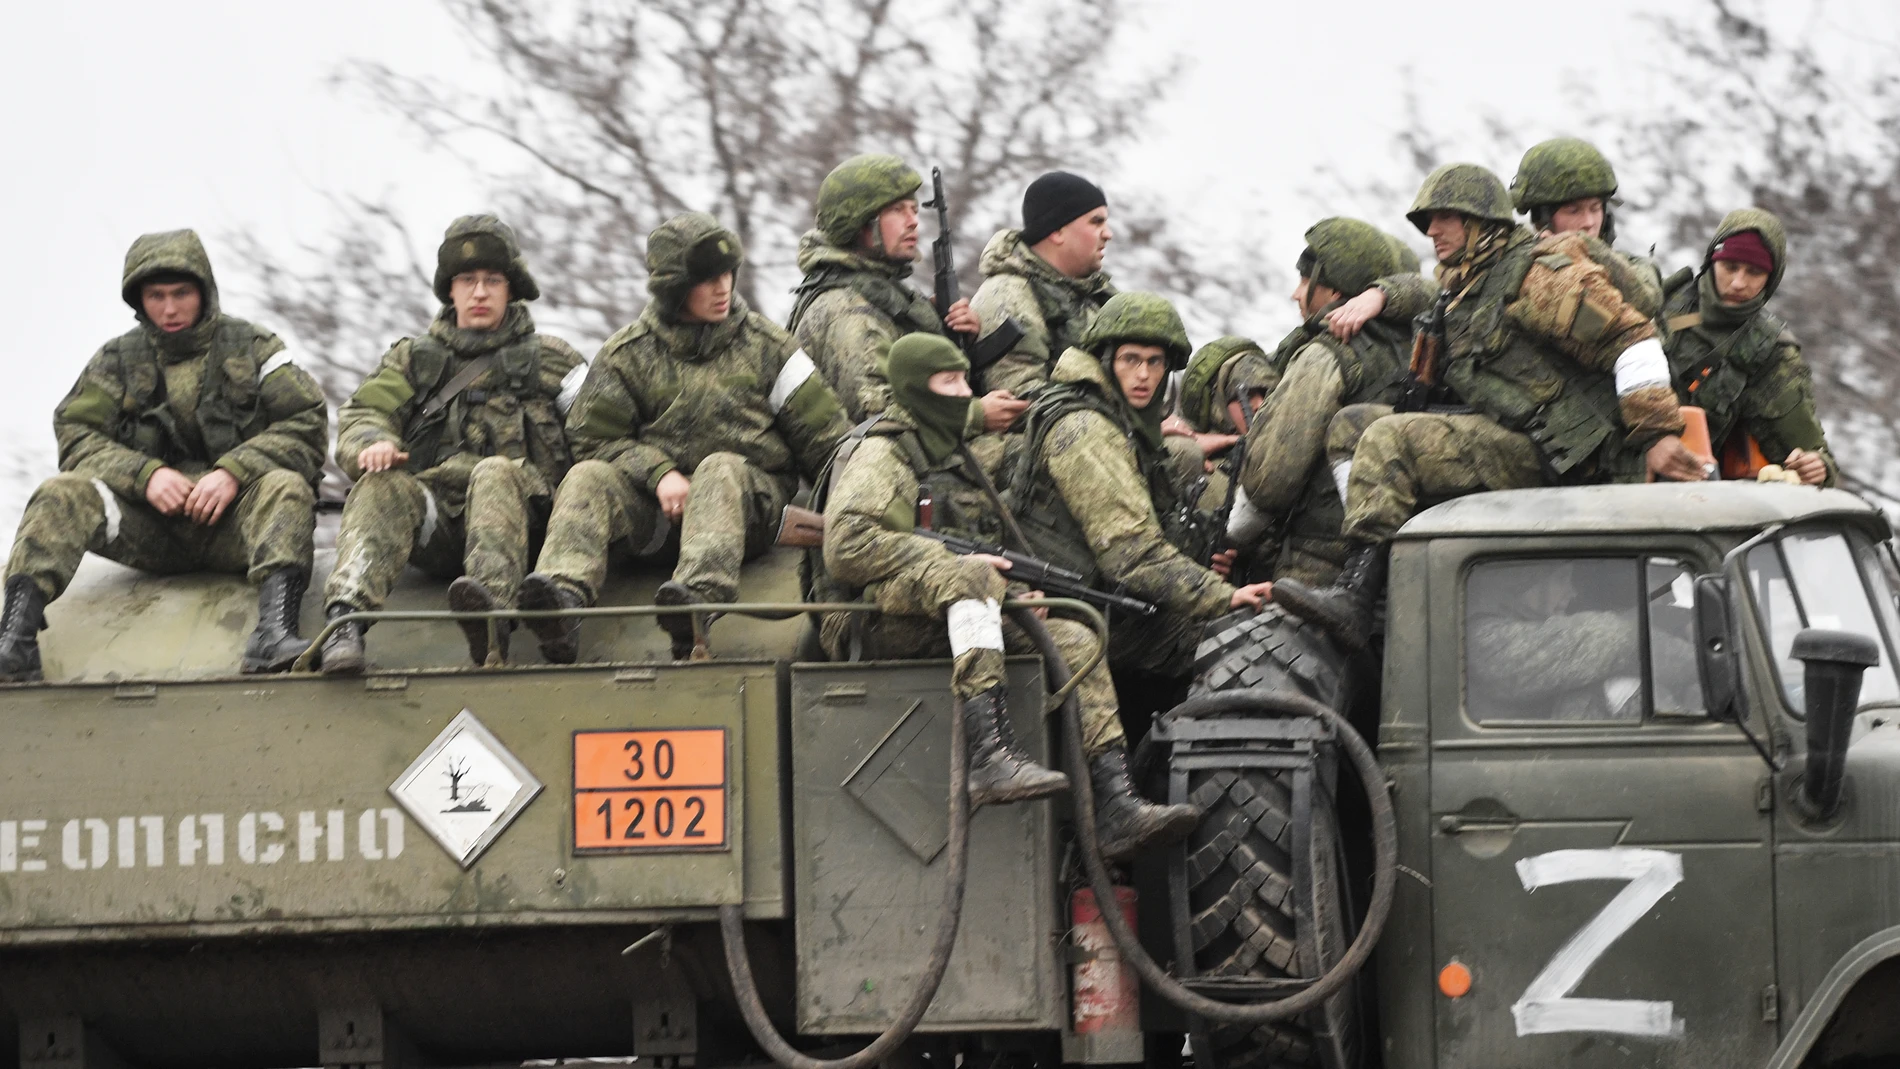 Russian servicemen are seen in Armyansk in the northern part of Crimea, on February 25, 2022, in Crimea. On February 24 Russian President Vladimir Putin announced a military operation in Ukraine following recognition of independence of breakaway Donbas republics. Editorial license valid only for Spain and 3 MONTHS from the date of the image, then delete it from your archive. For non-editorial and non-licensed use, please contact EUROPA PRESS. Editorial license valid for 3 MONTHS from the date of the image, then delete from your archive. For non-editorial and non-licensed use, please contact EUROPA PRESS. 25 FEBRERO 2022;CRIMEA;PUTIN;FORCES Konstantin Mihalchevskiy / Sputn 25/02/2022